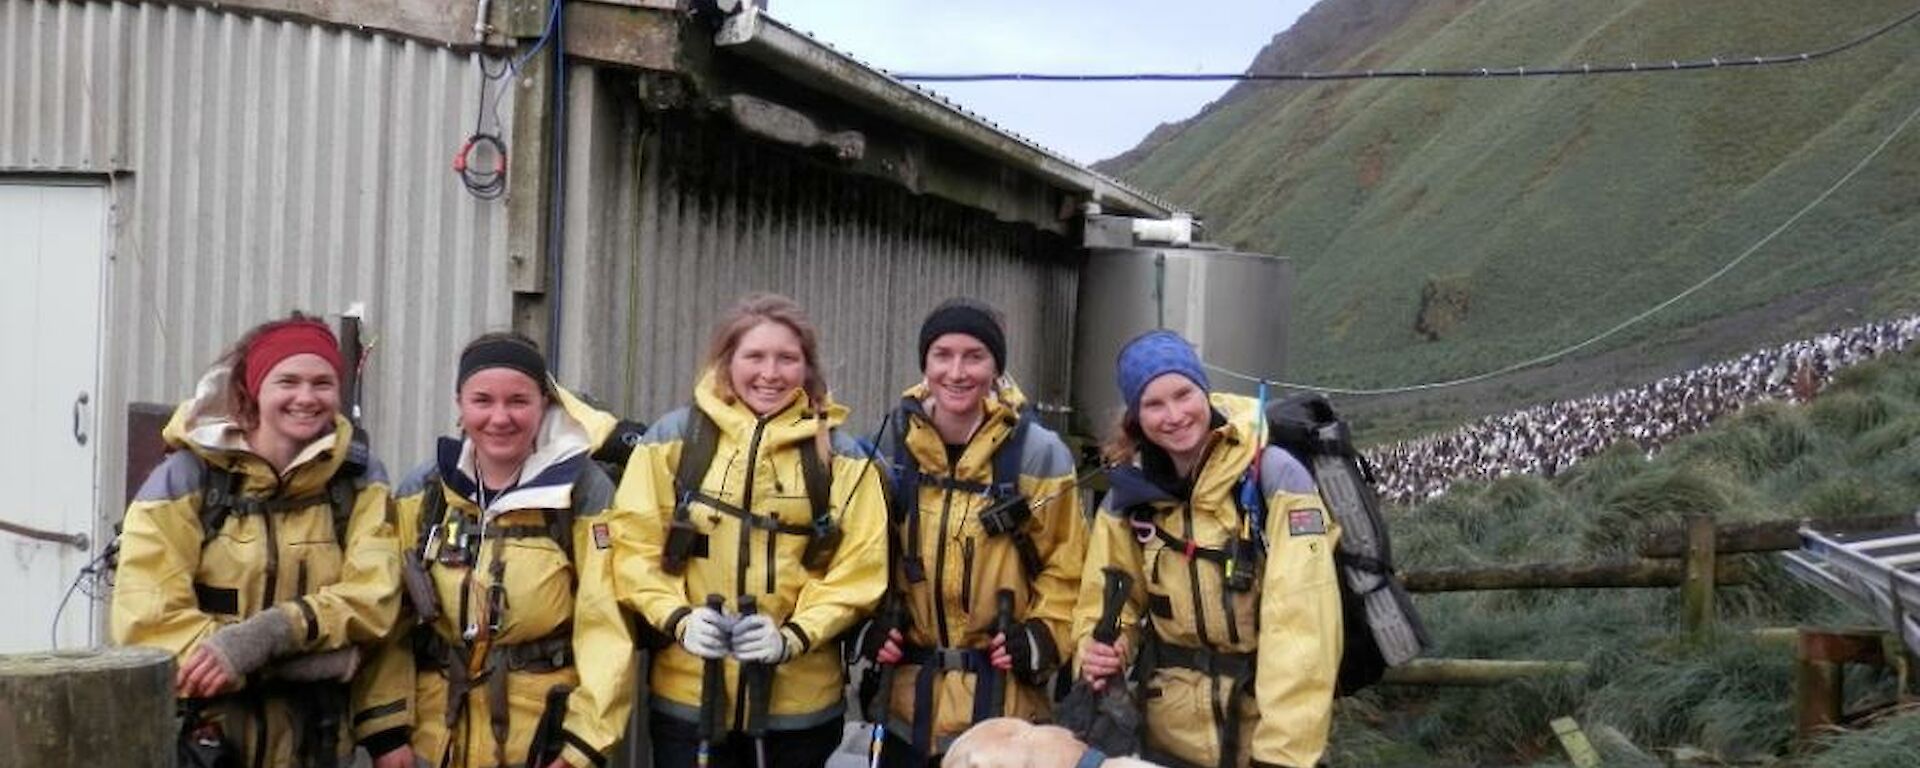 Ange, Leona, Jaimie, Kate and Karen outside of Hurd Point hut all geared up ready to head back to VJM